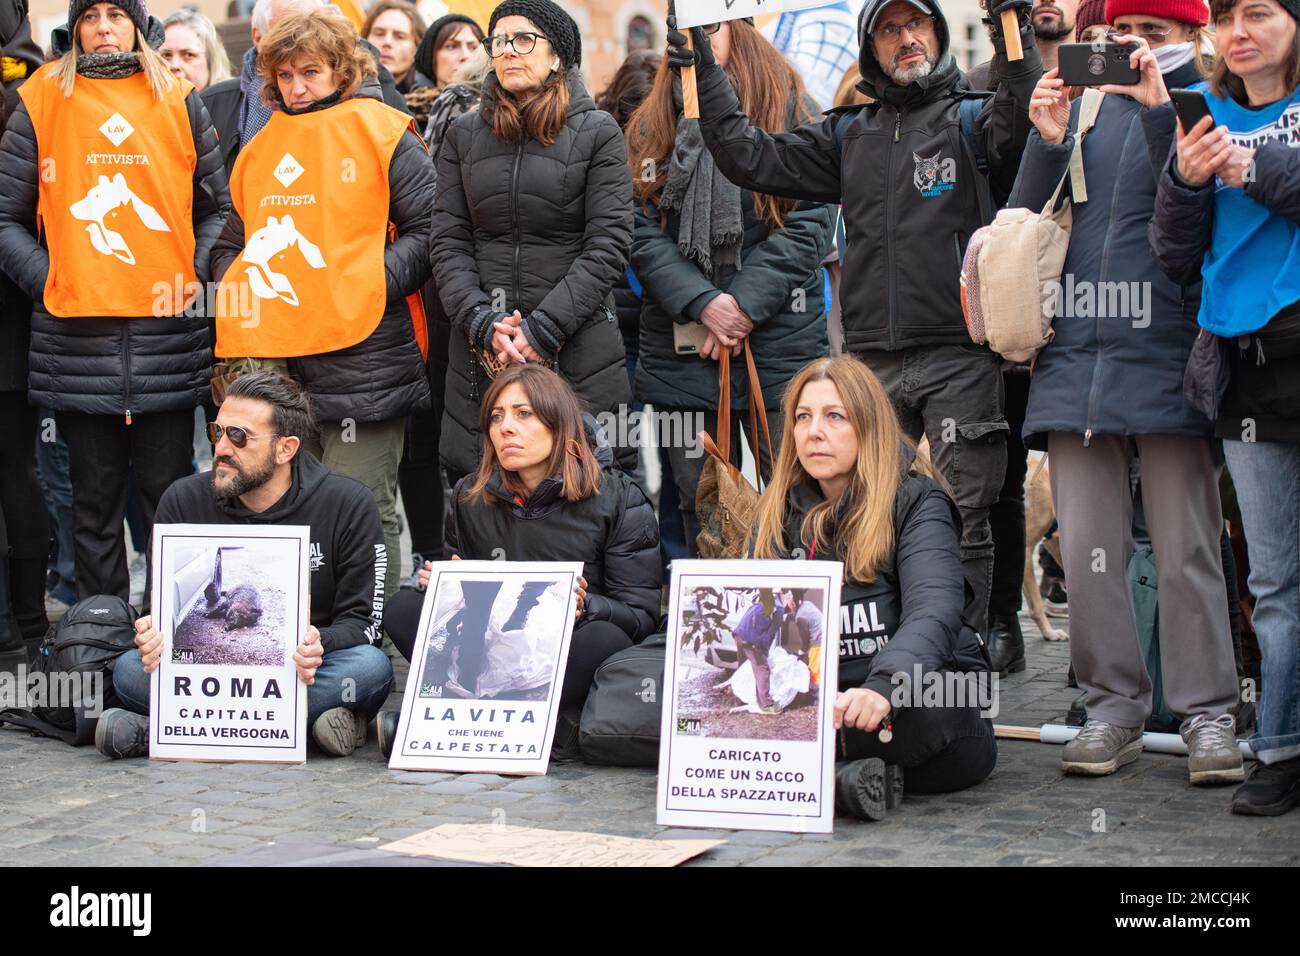 Rome, Italy, January 21st, 2023. Demonstration of the italia animal rights activists organized by the Cadapa association to contest the amendment approved in the Senate with the Budget Law which allows wild animal hunting even in urban areas. The modification of article 19 of the law of 11 February 1992, n.157 condemns to death wild species, even protected ones, and allows dangerous slaughter of animals even in the city. Marcello Valeri / Alamy Live News. Stock Photo